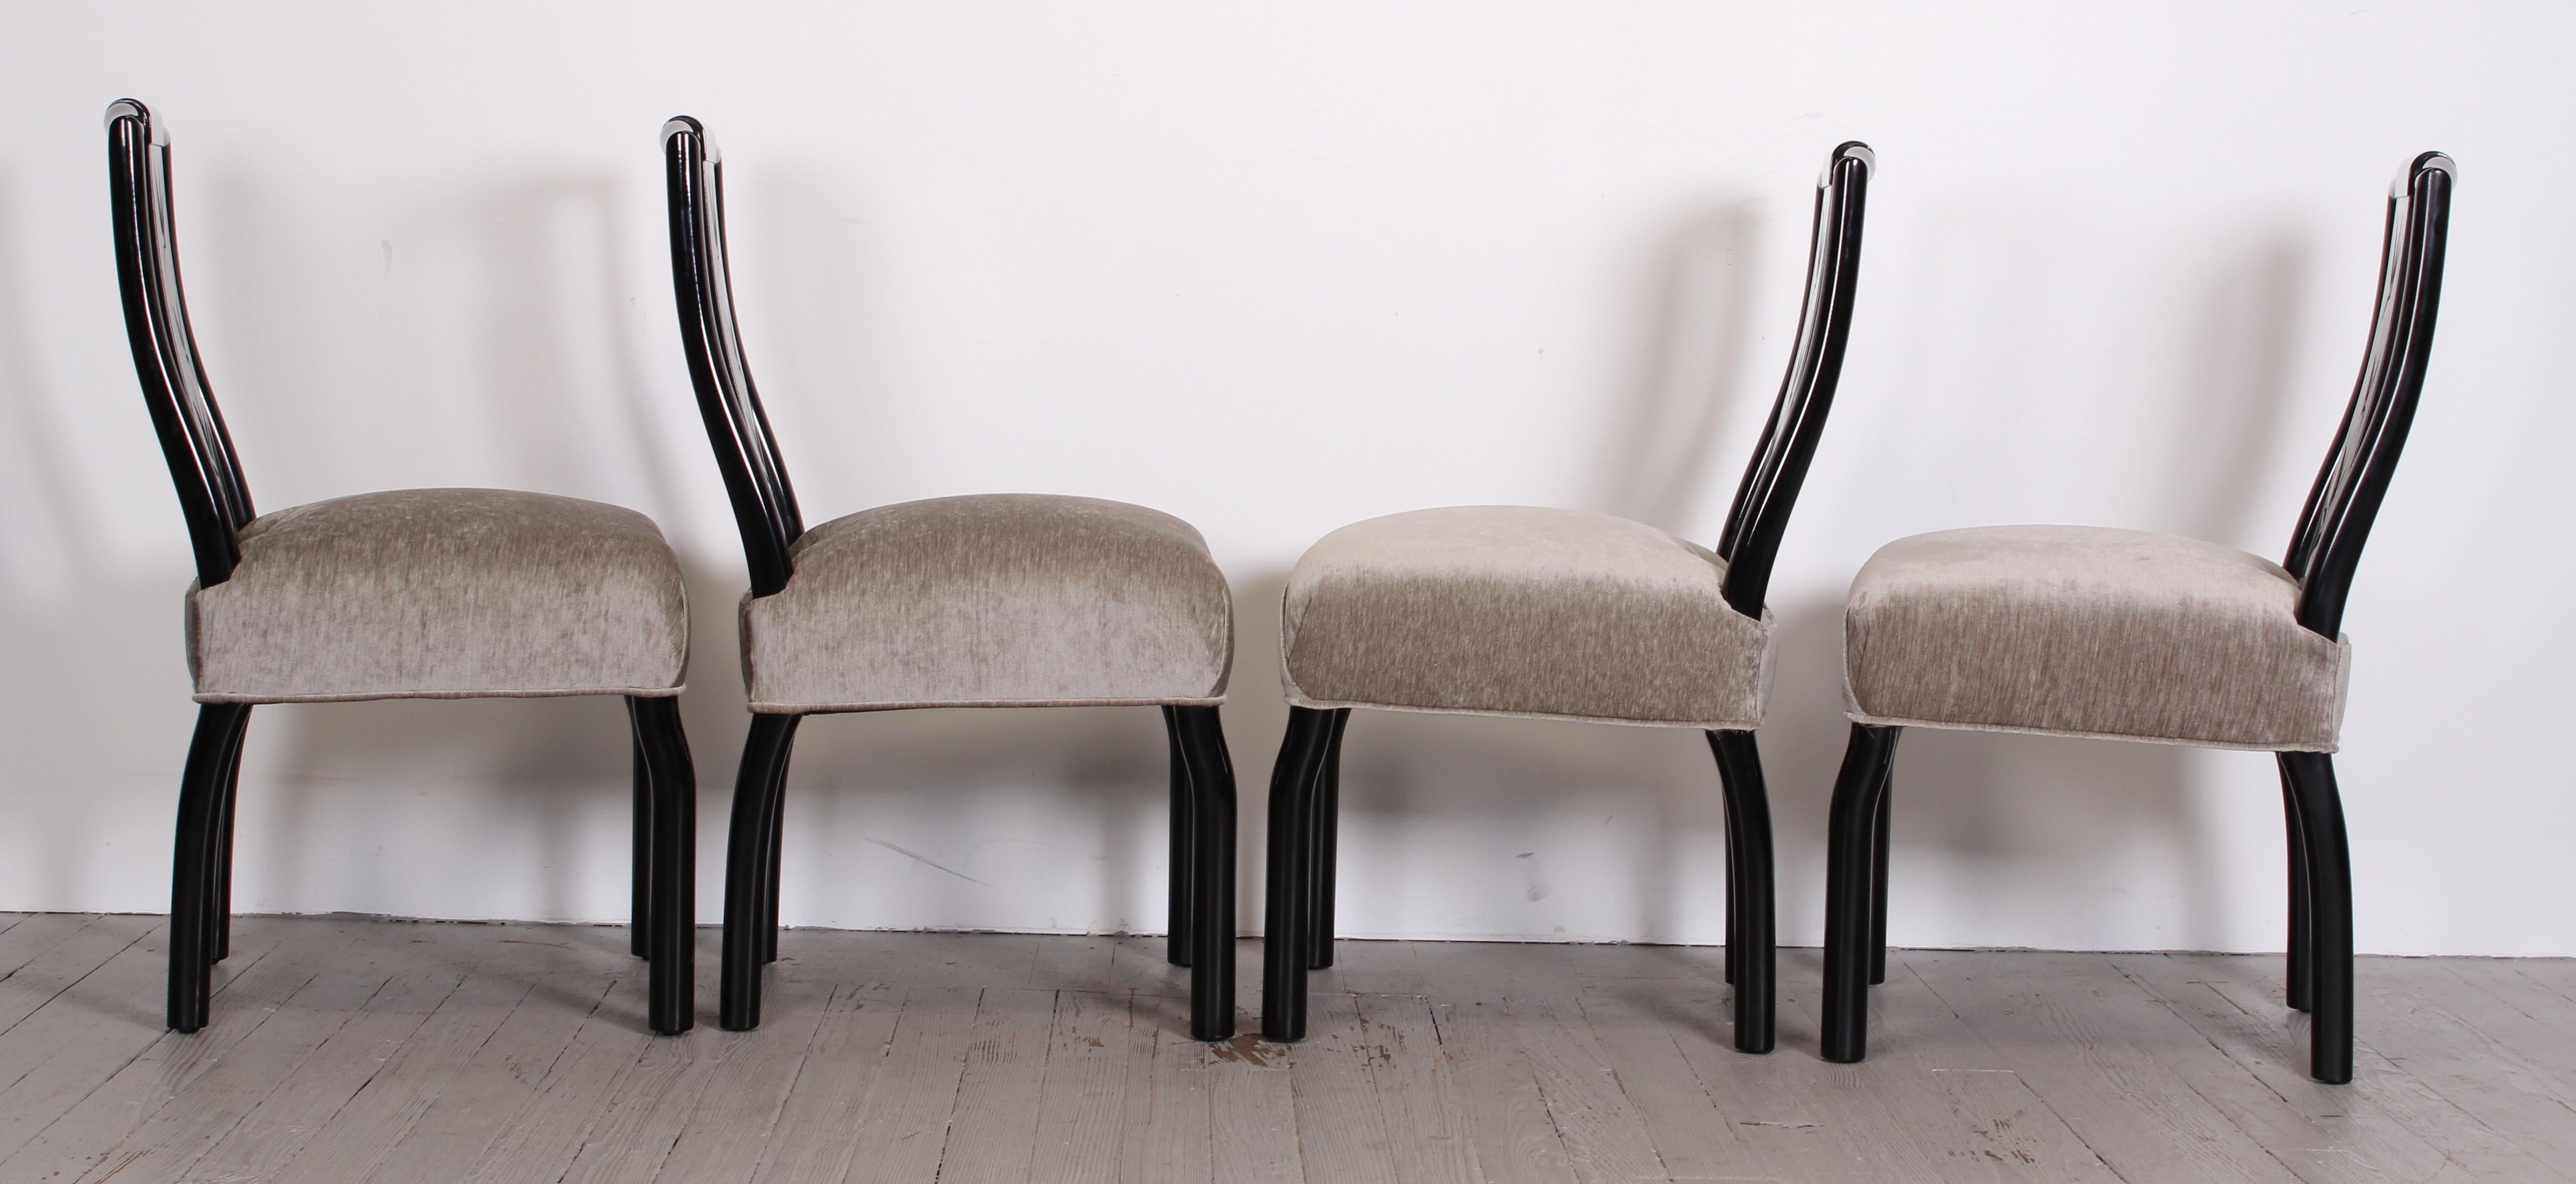 Mid-20th Century James Mont Set of Eight Chairs Asian Modern, 1940s